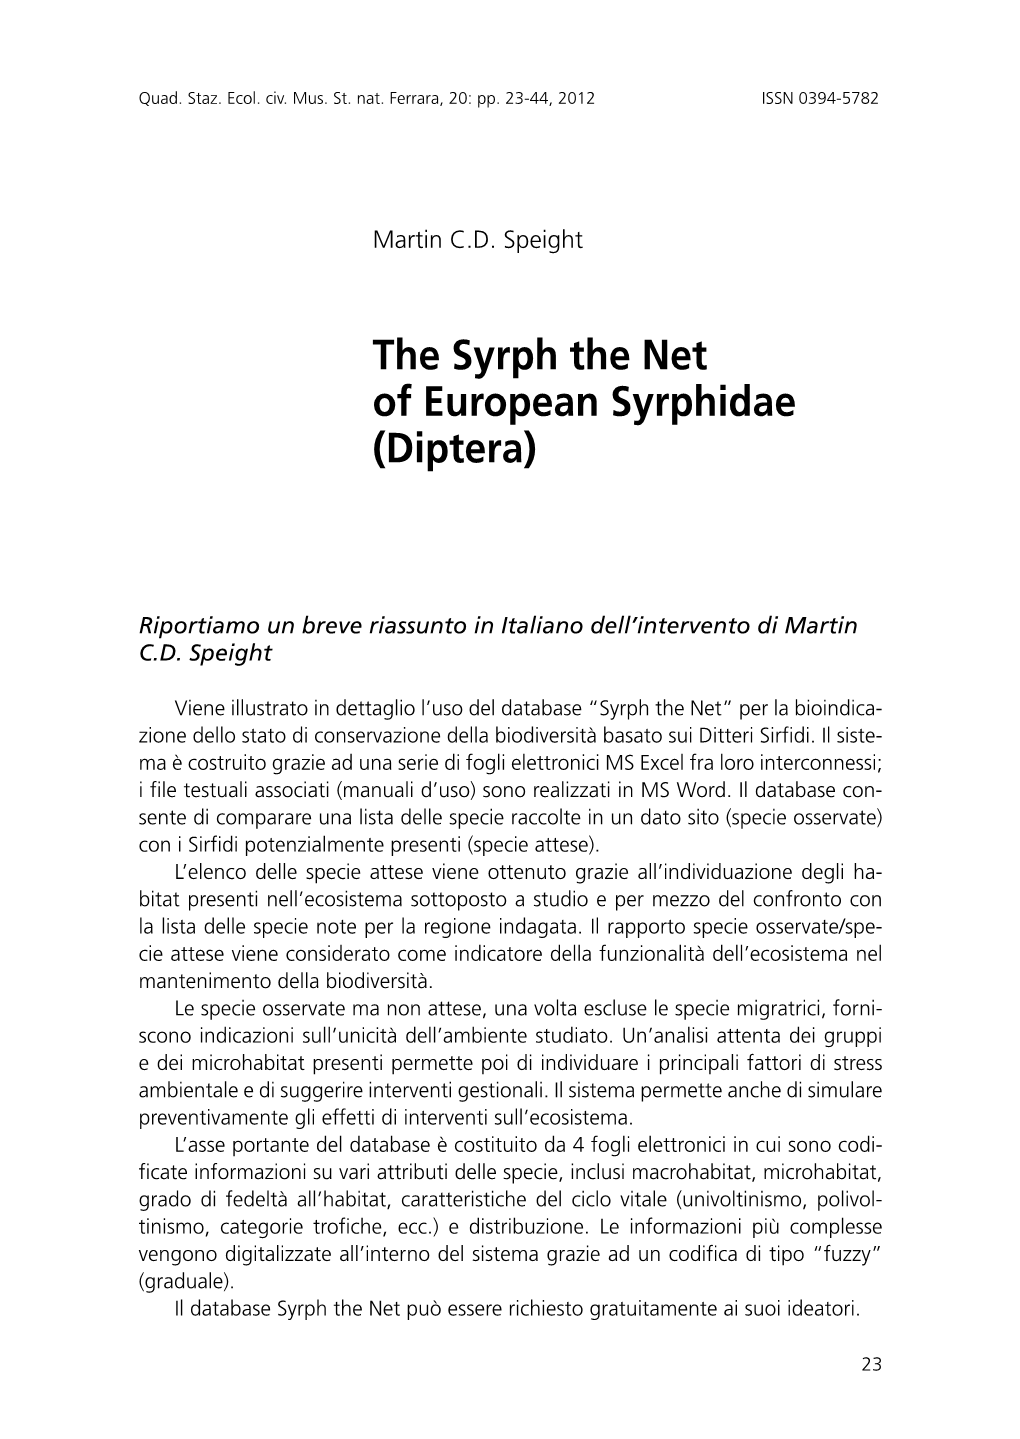 The Syrph the Net of European Syrphidae (Diptera)